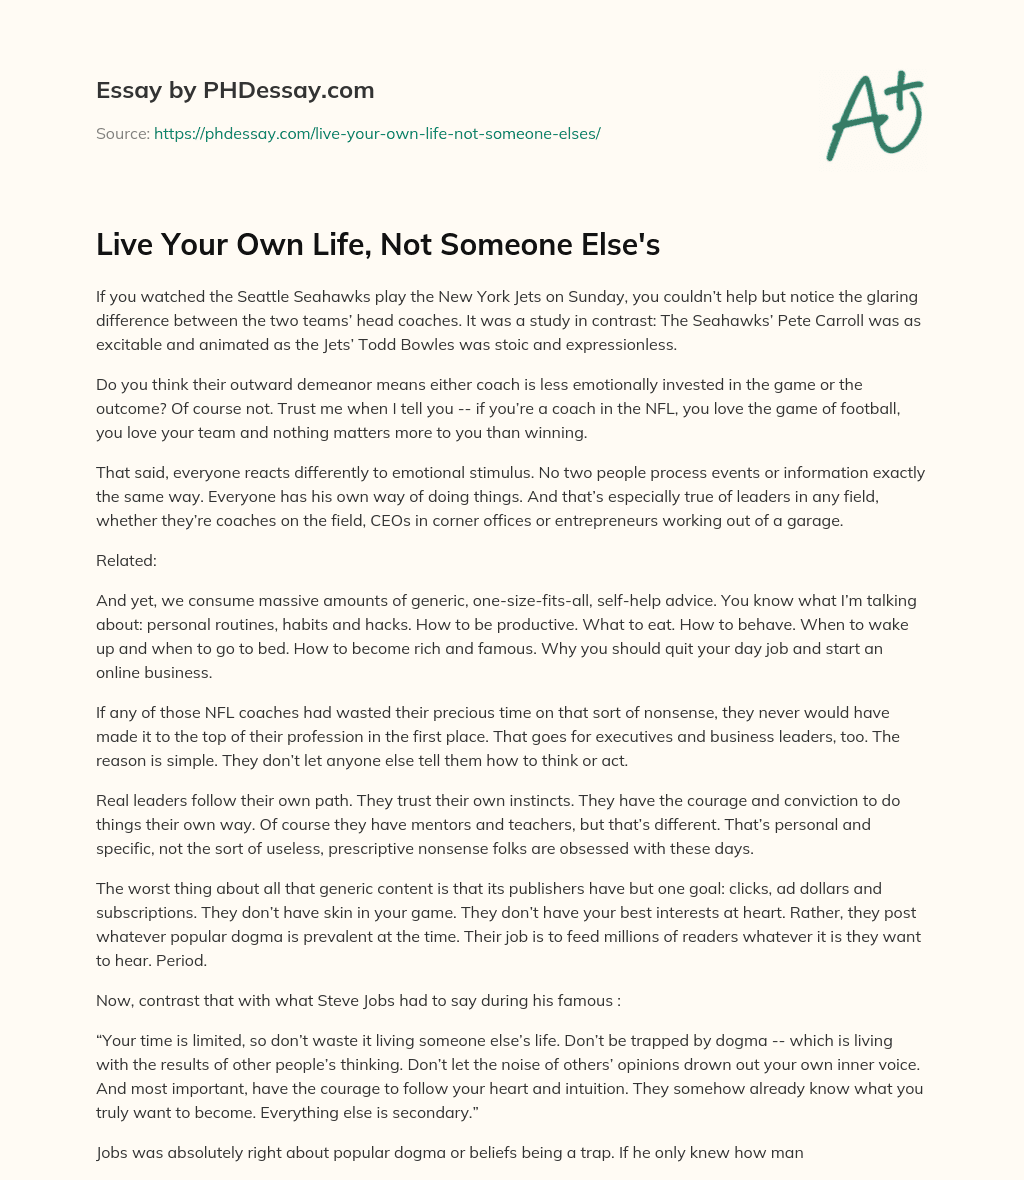 Live Your Own Life, Not Someone Else’s essay